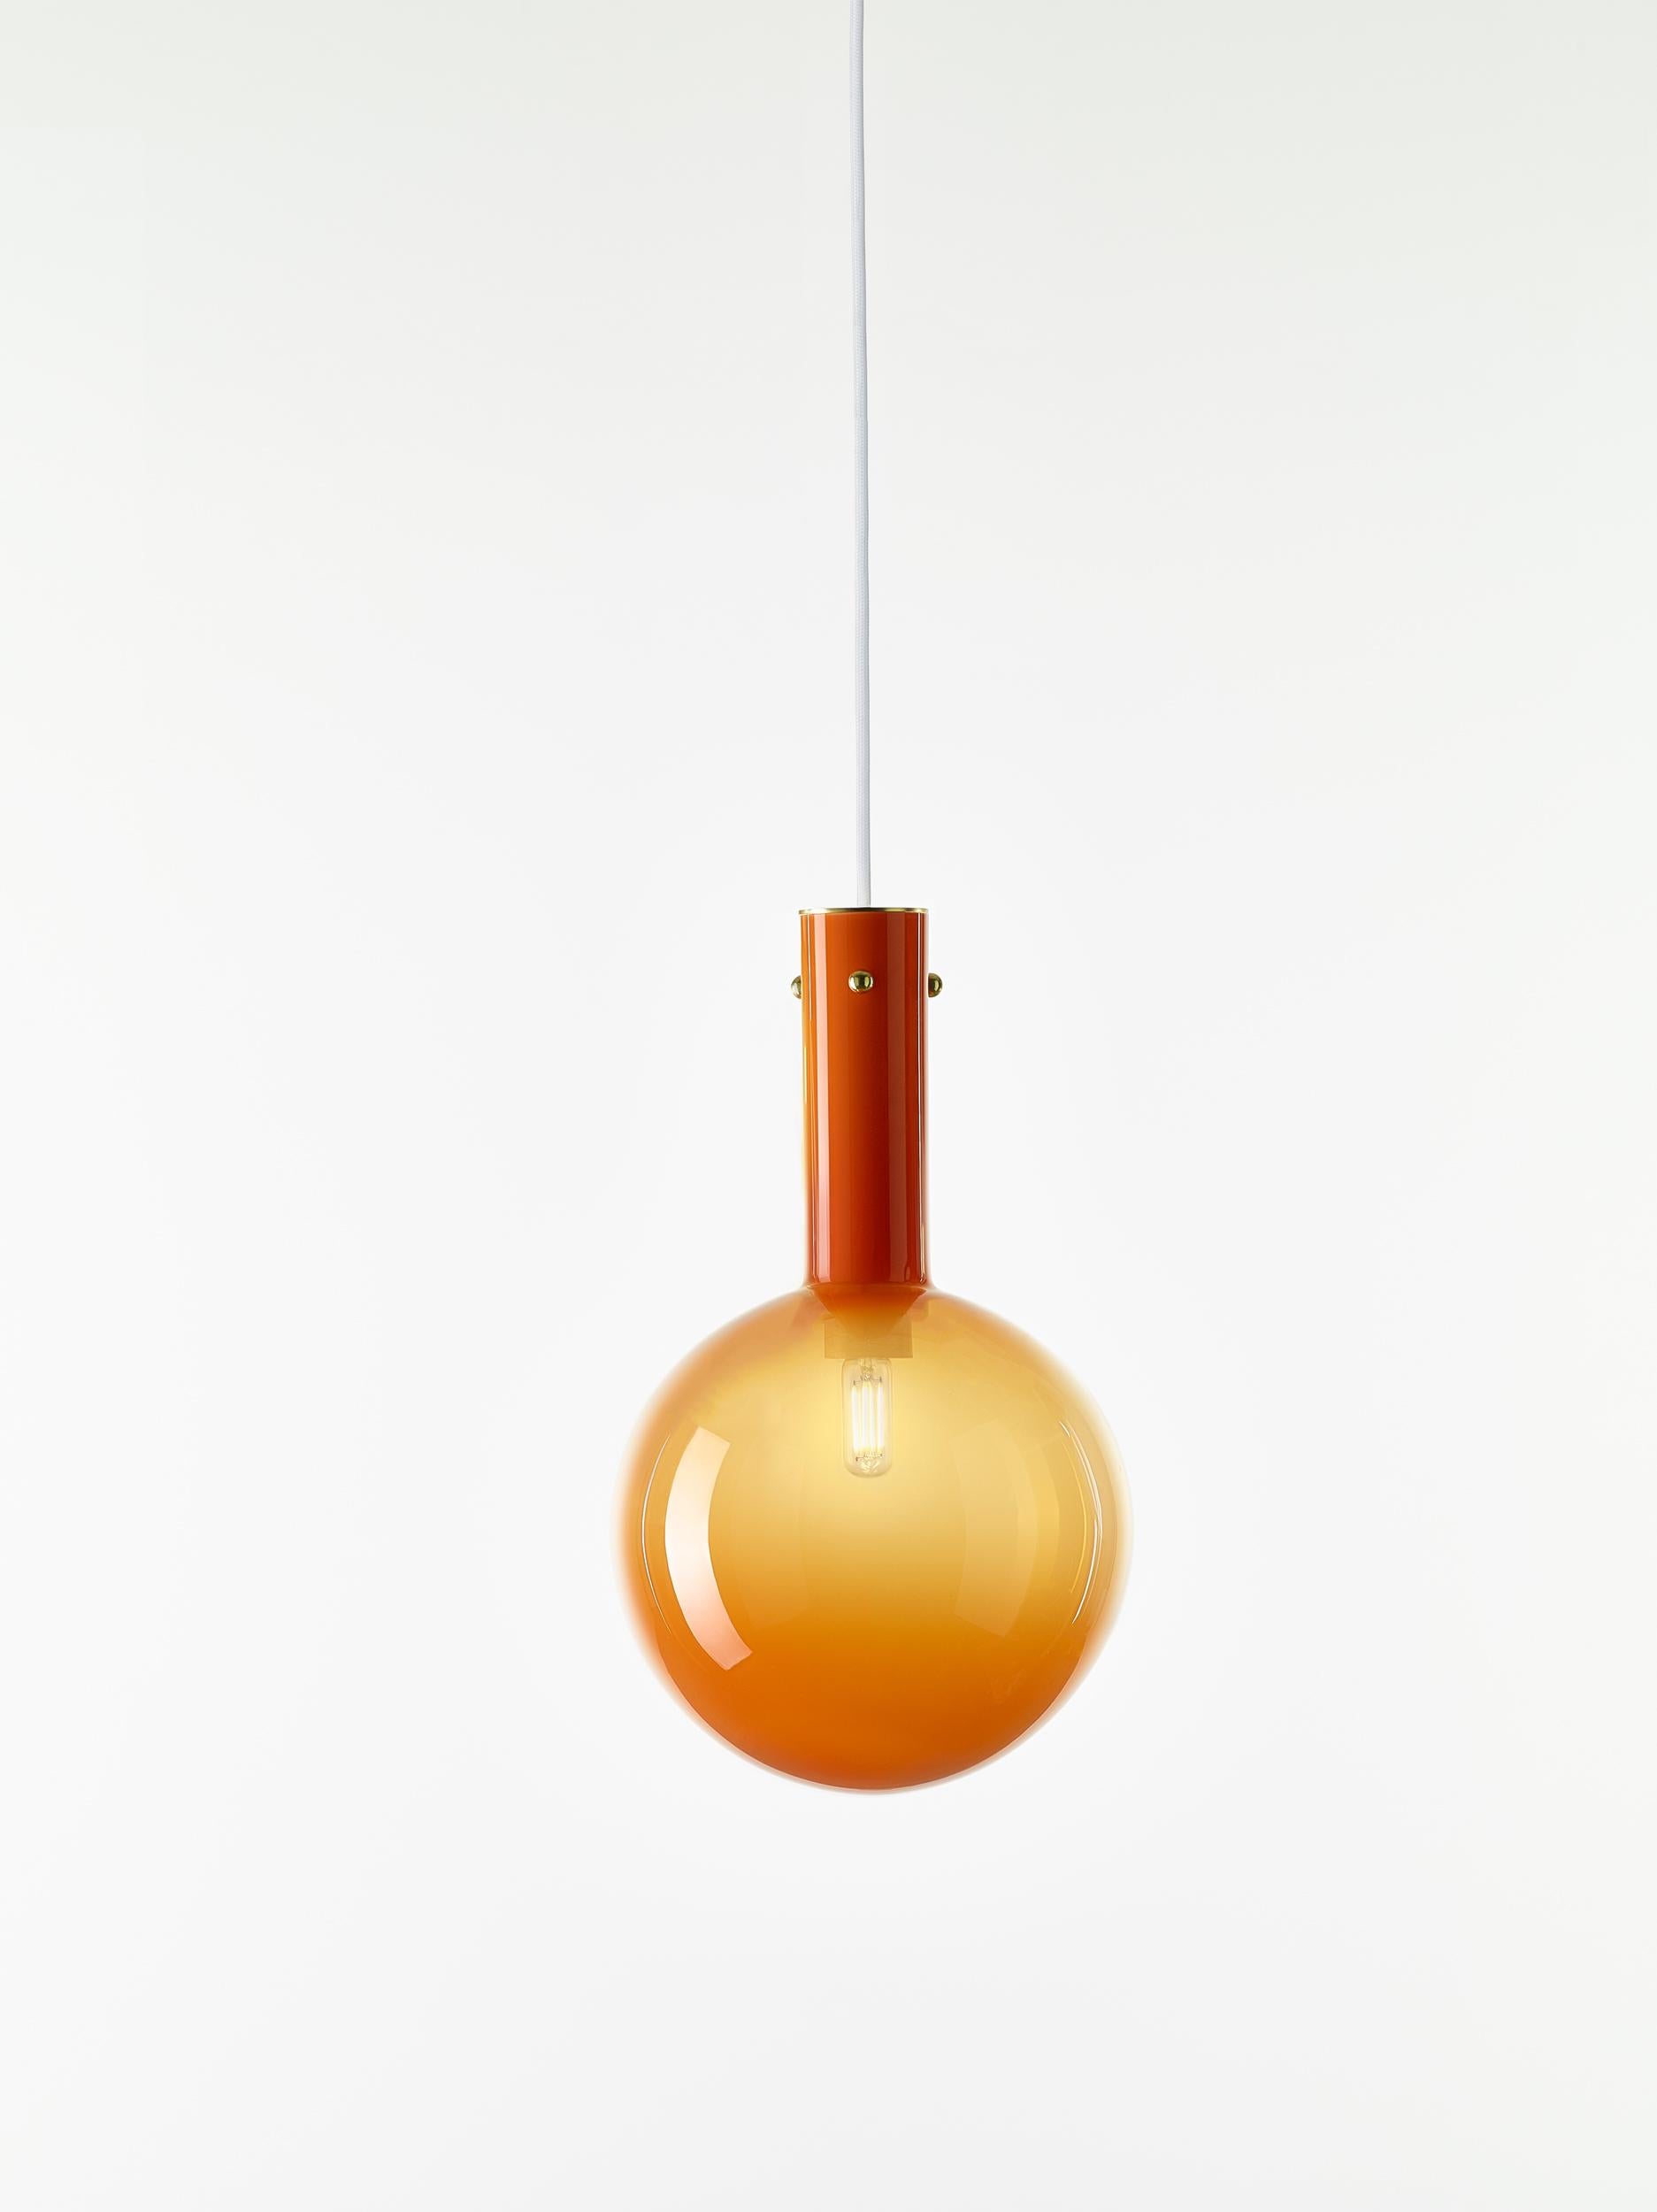 Set of 2 orange Sphaerae pendant lights by Dechem Studio
Dimensions: D 20 x H 180 cm
Materials: brass, metal, glass.
Also available: different finishes and colors available.

Only one homogenous piece of hand-blown glass creates the main body